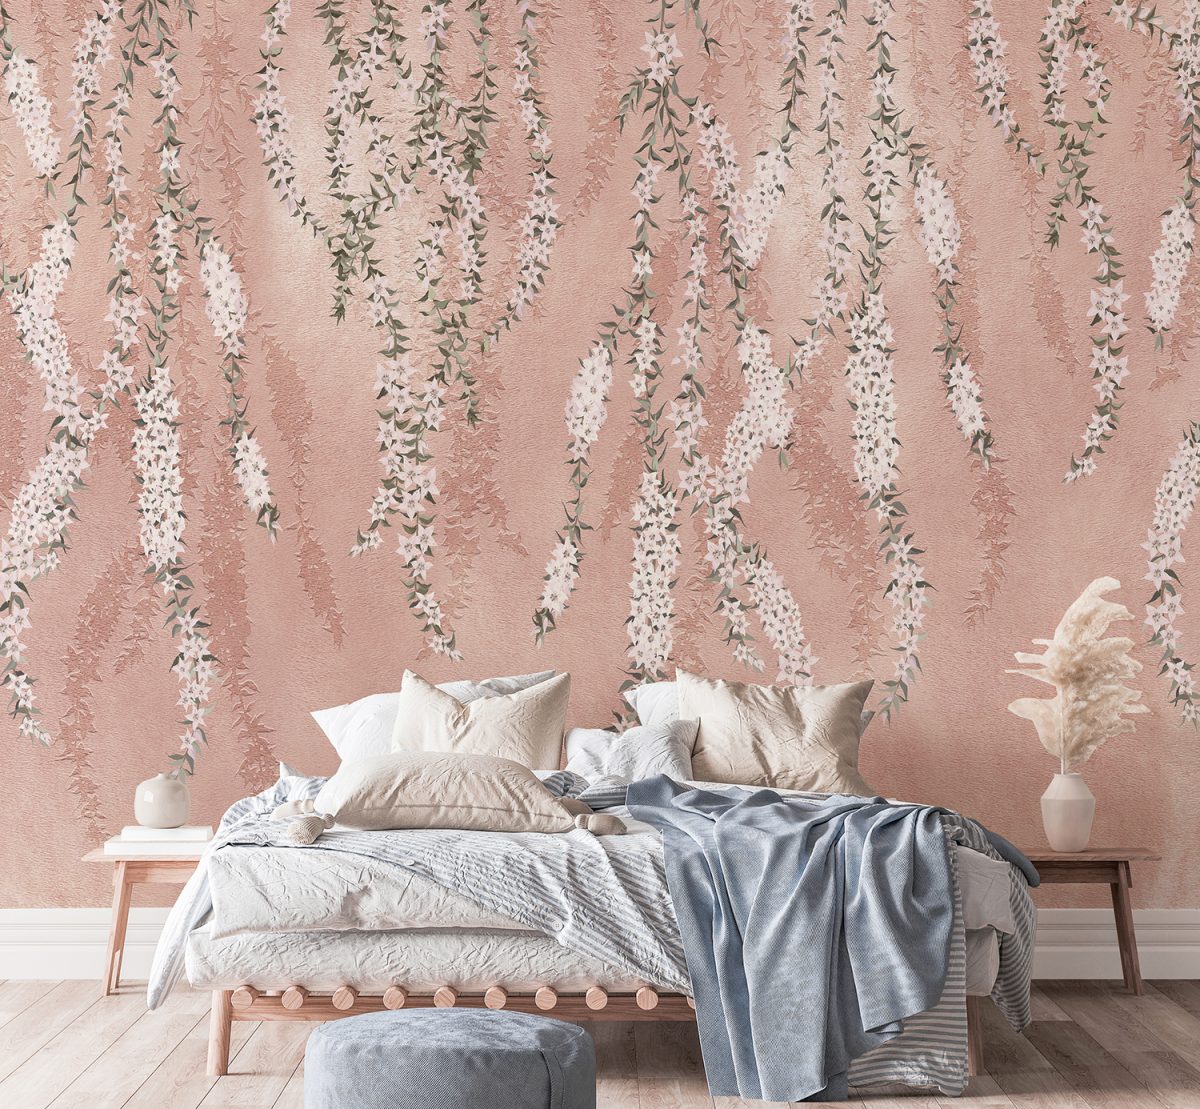 Wallpaper - Decorative Wallpaper Online For Stylish Home Upgrades